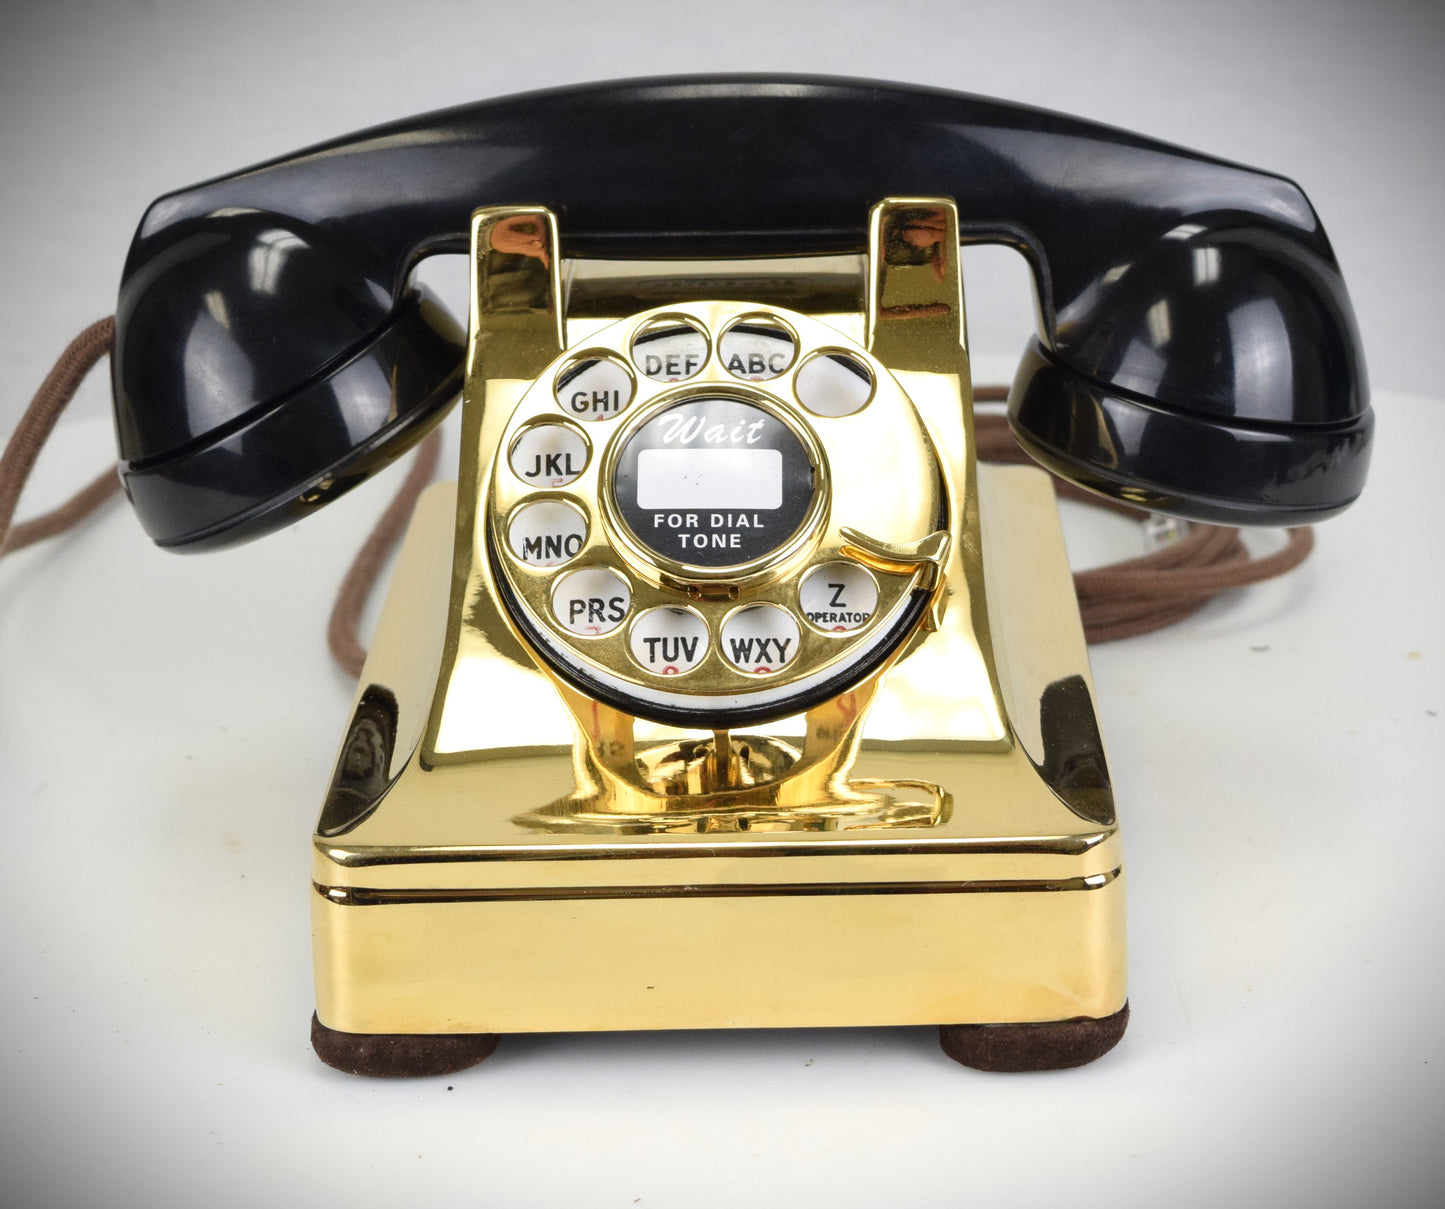 Western Electric 302 - Gold